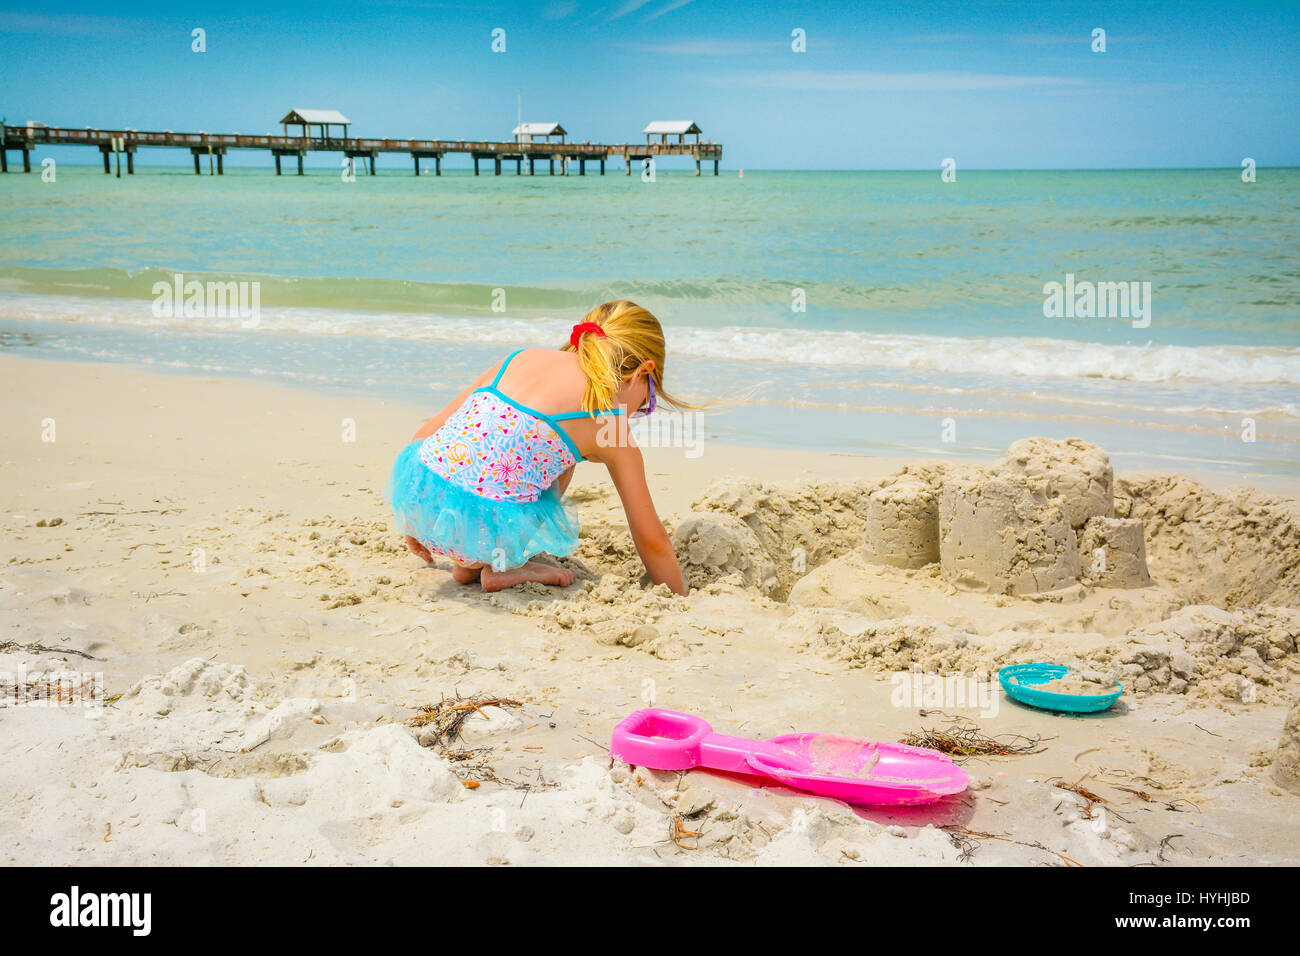 Rear view of young blond girl in blue bathingsuit plays on white sand beach at Clearwater Beach, FL with Pier 60 and the shoreline nearby on the Gulf  Stock Photo